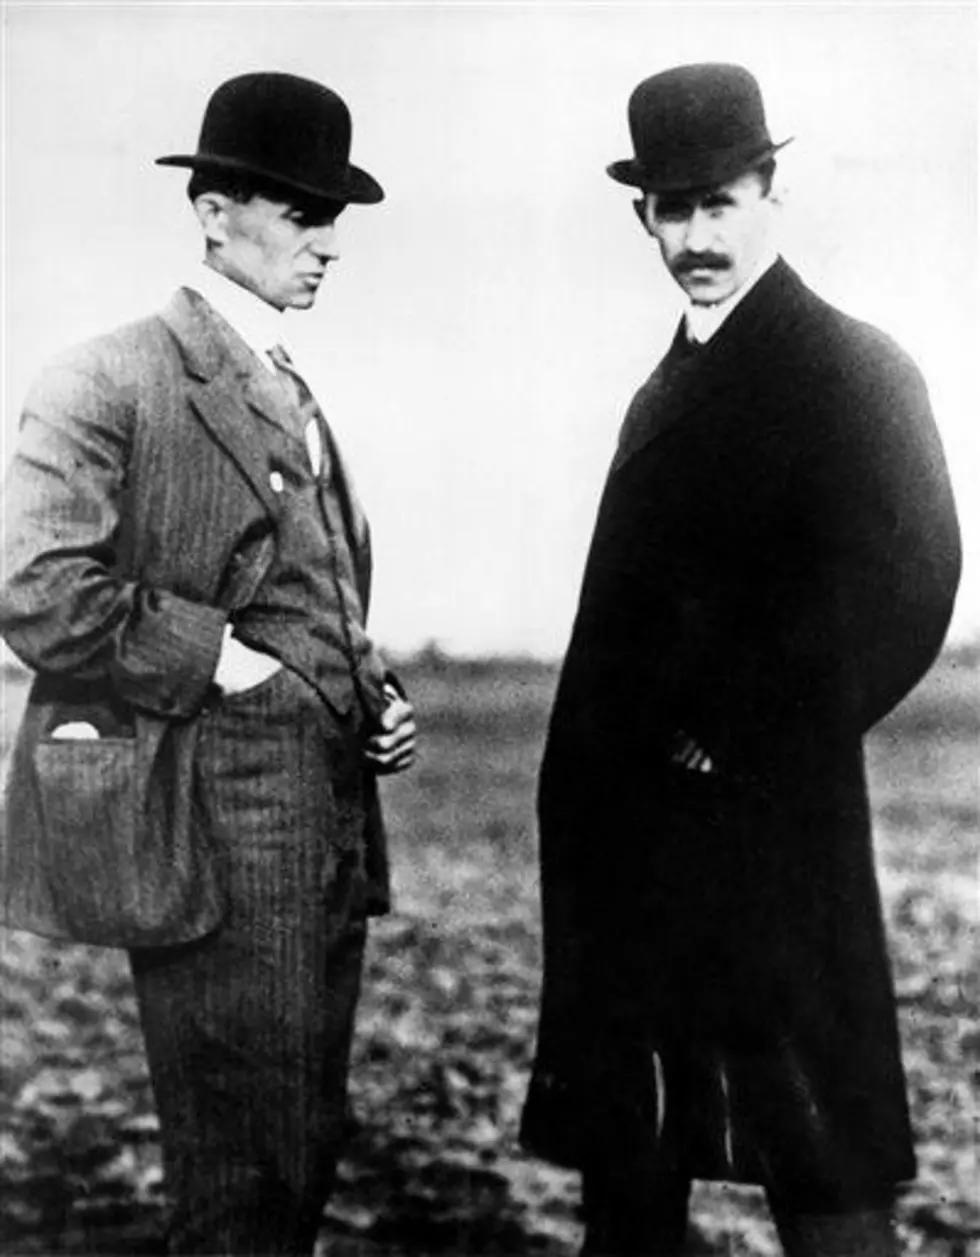 Wright brothers’ mechanic honored at Ohio museum